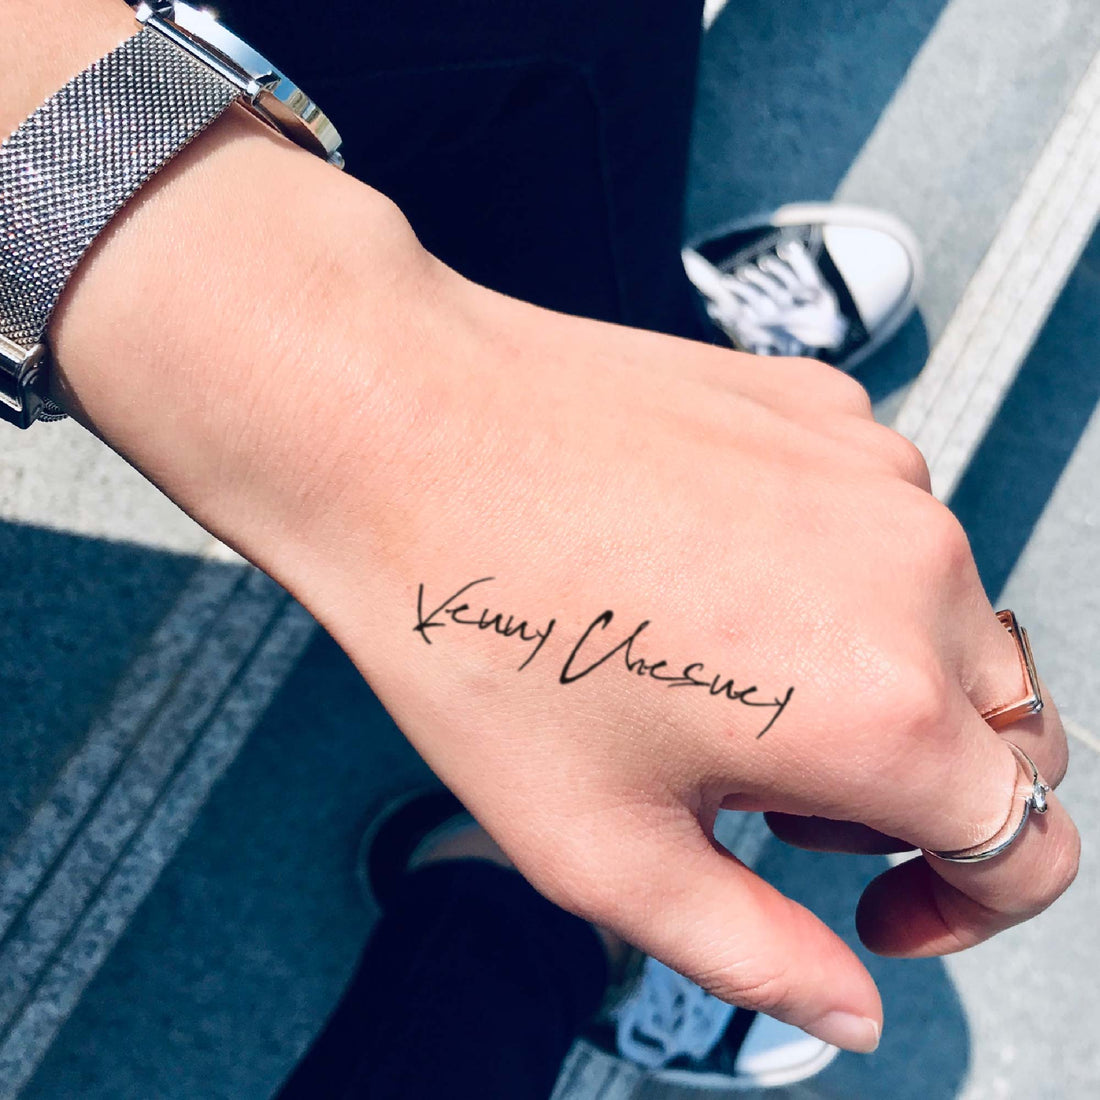 Kenny Chesney custom temporary tattoo sticker design idea inspiration meanings removal arm wrist hand words font name signature calligraphy lyrics tour concert outfits merch accessory gift souvenir costumes wear dress up code